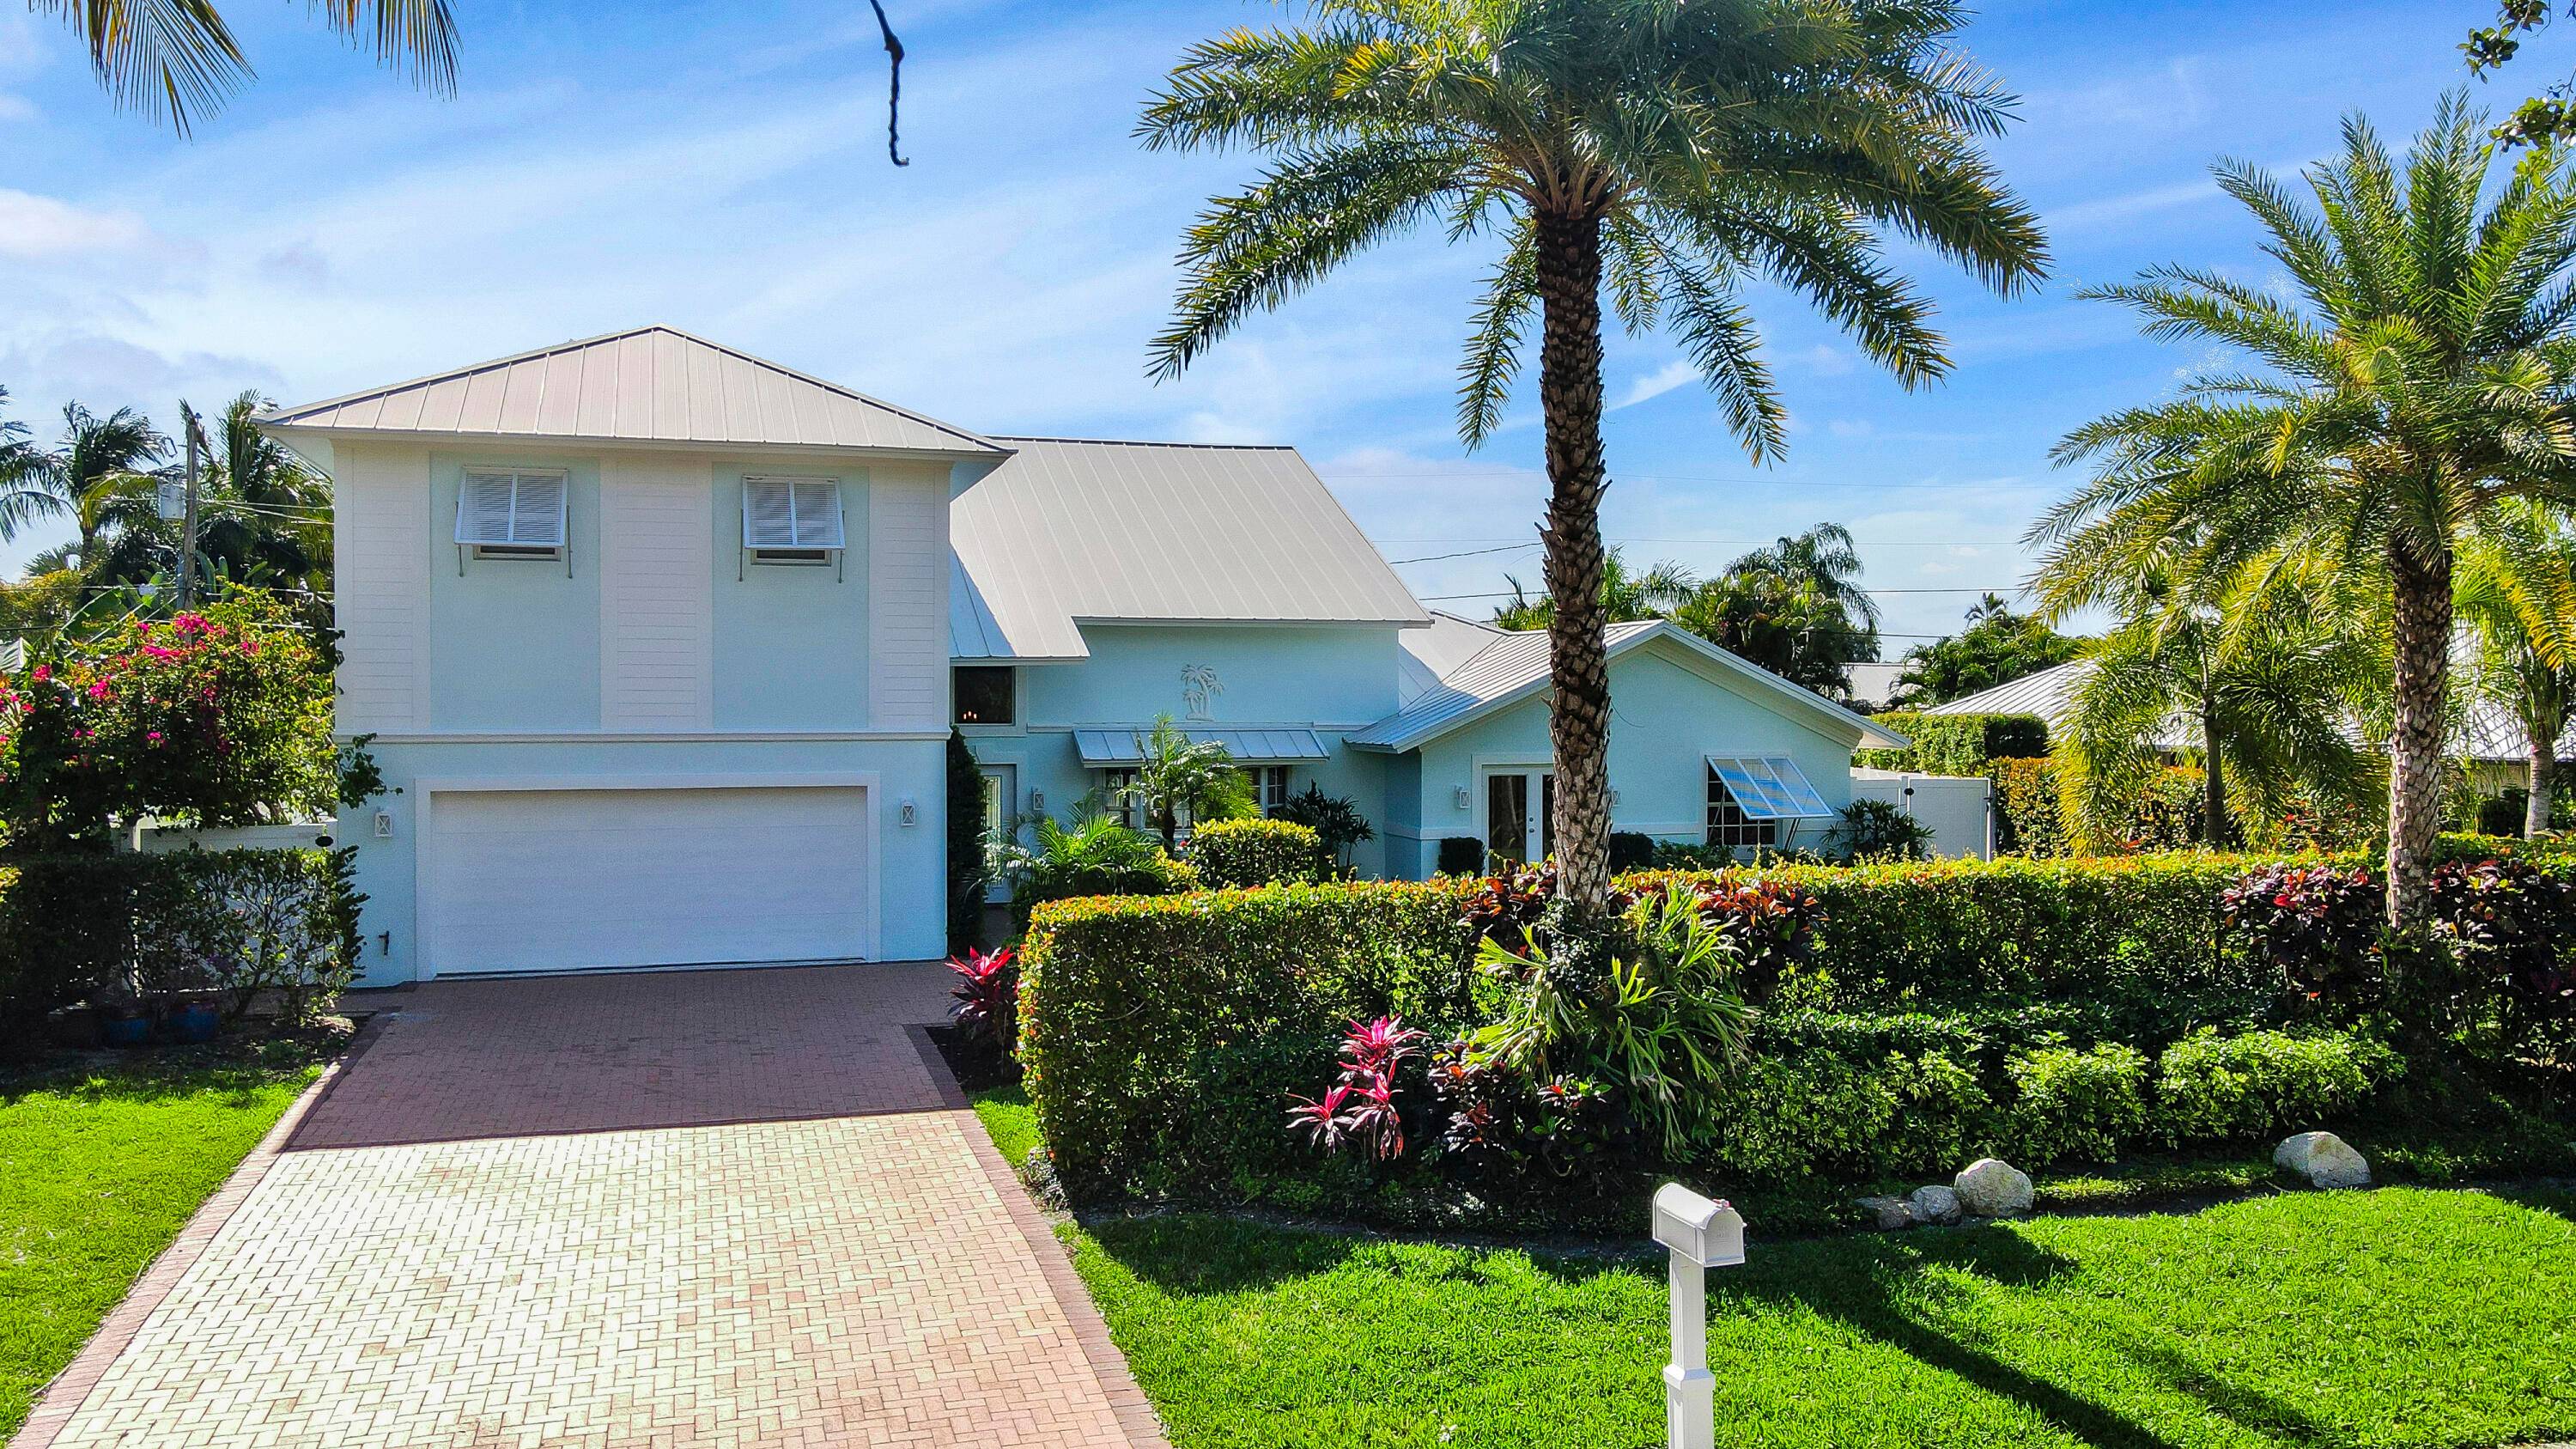 Come see this AMAZING 4 bedroom, 3 bathroom POOL home in Jupiter, Florida !